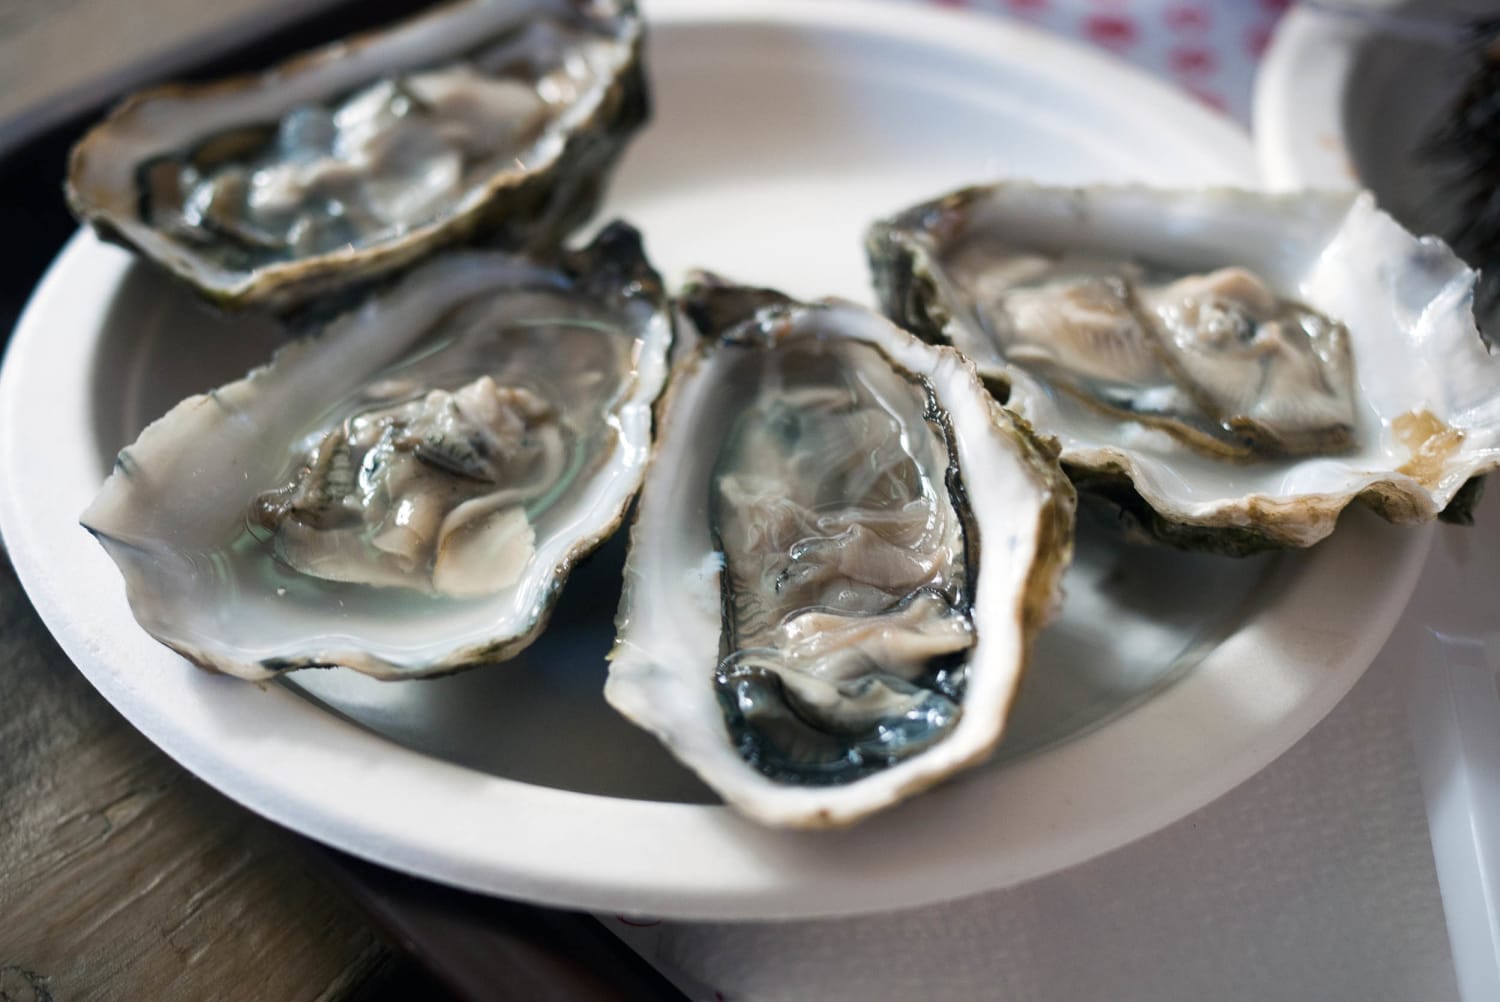 A flesh-eating bacteria linked to raw oysters may be on the rise. Here's what to know